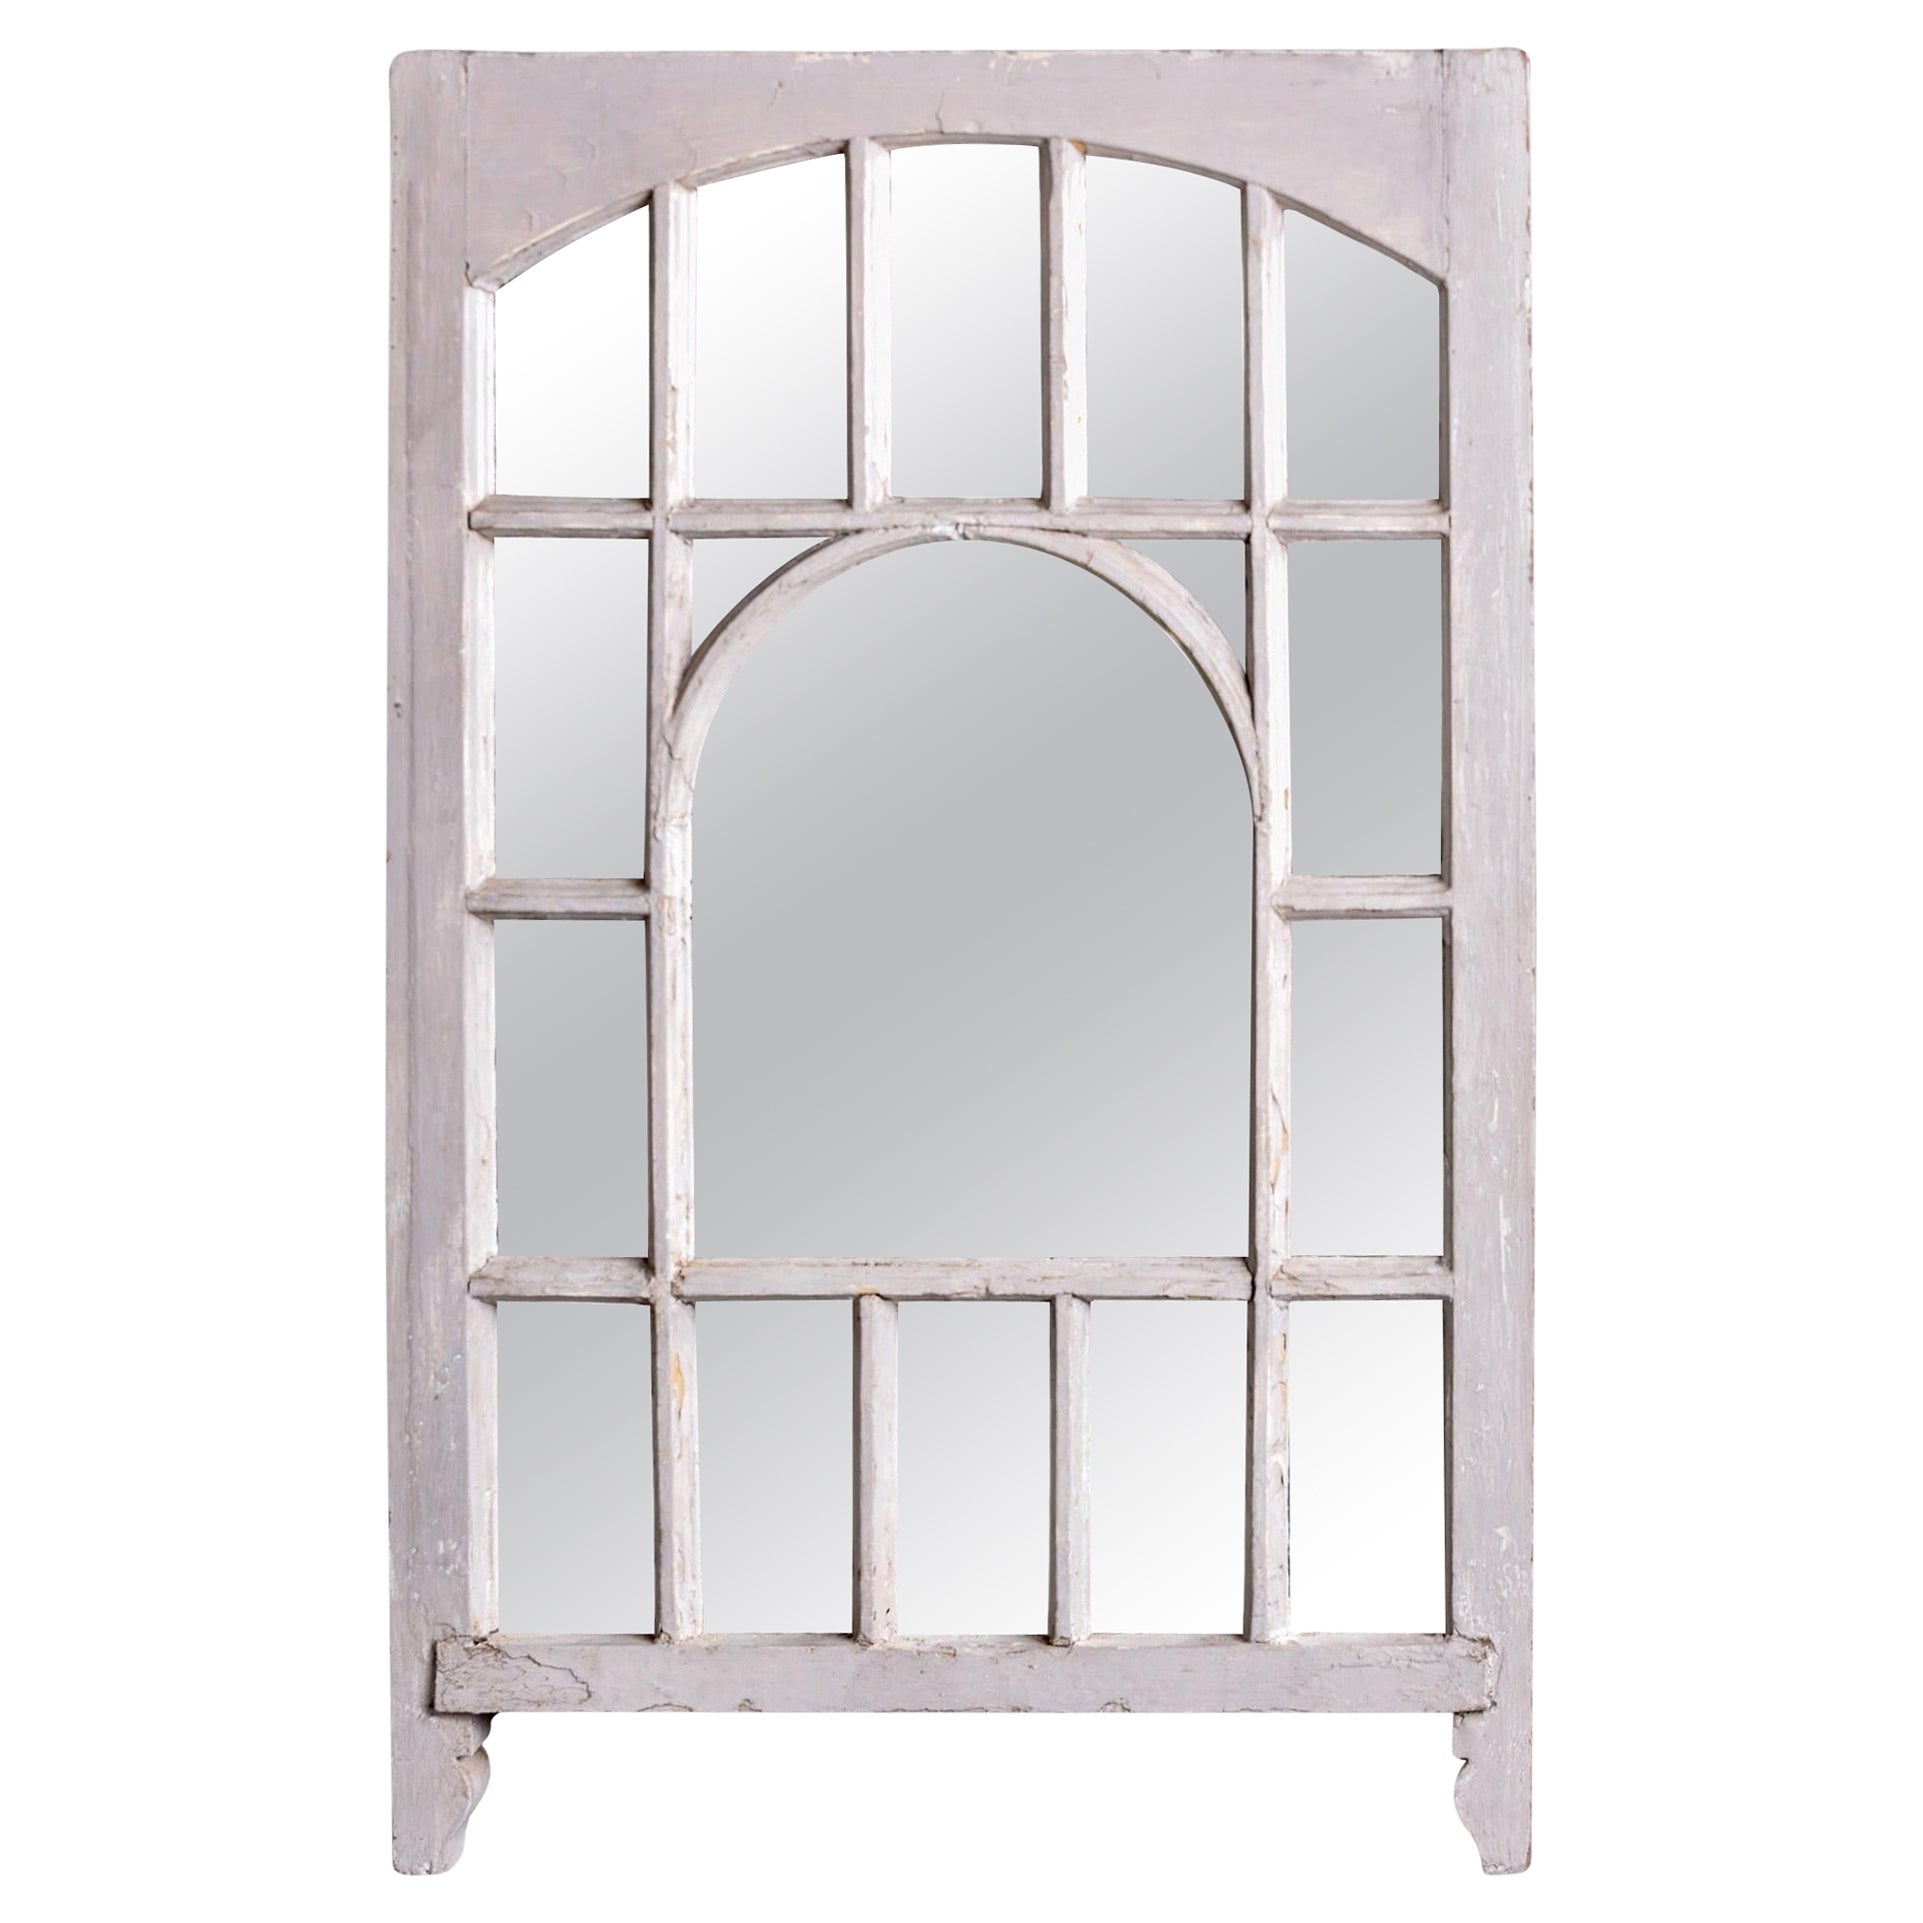 Early 20th C English White Painted Window Frame Mirror